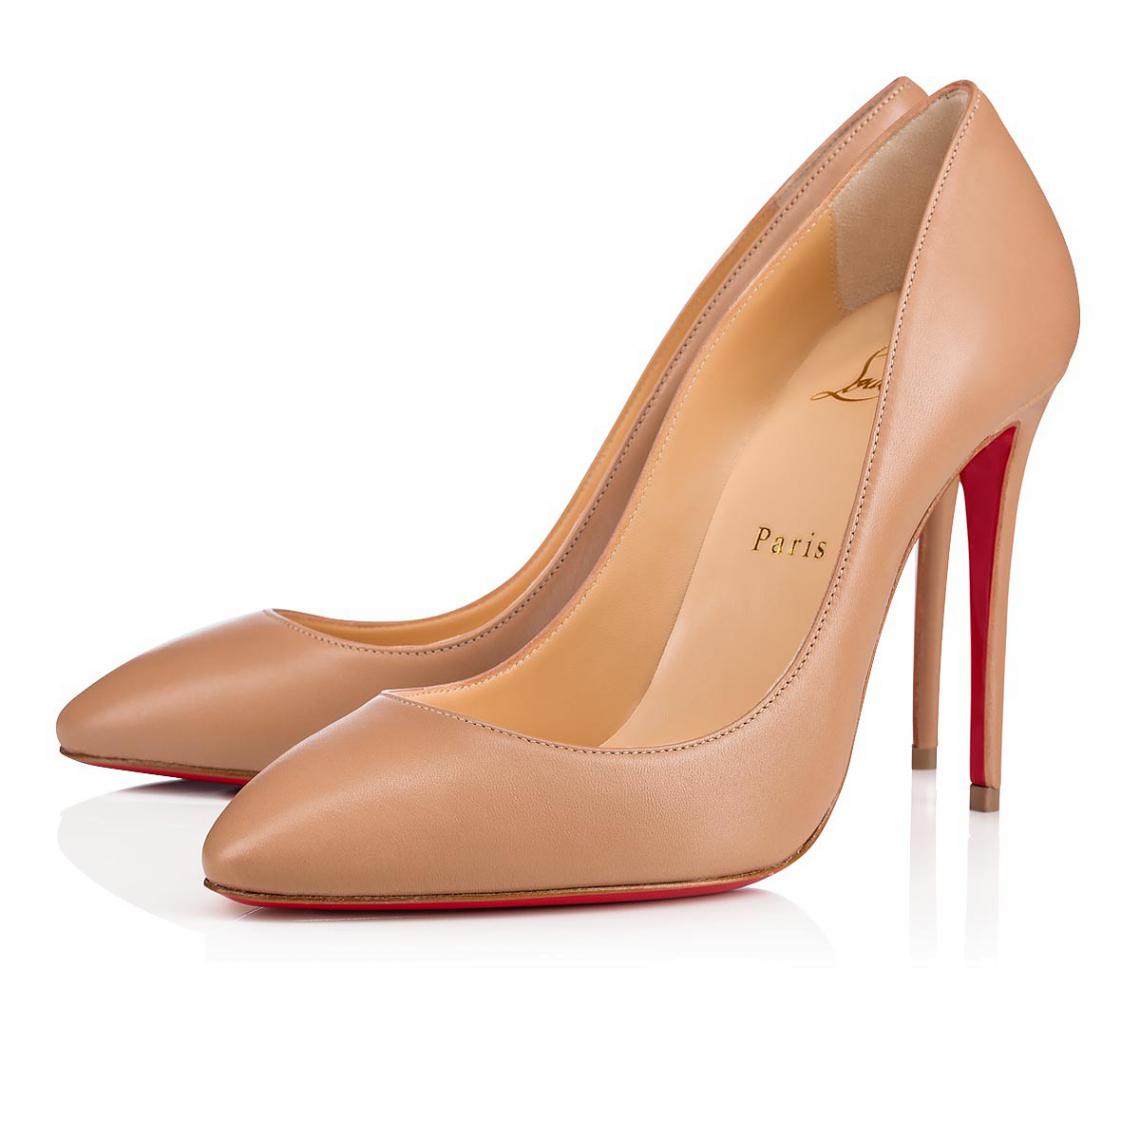 Christian Louboutin Pumps - Up to 70% off at Tradesy